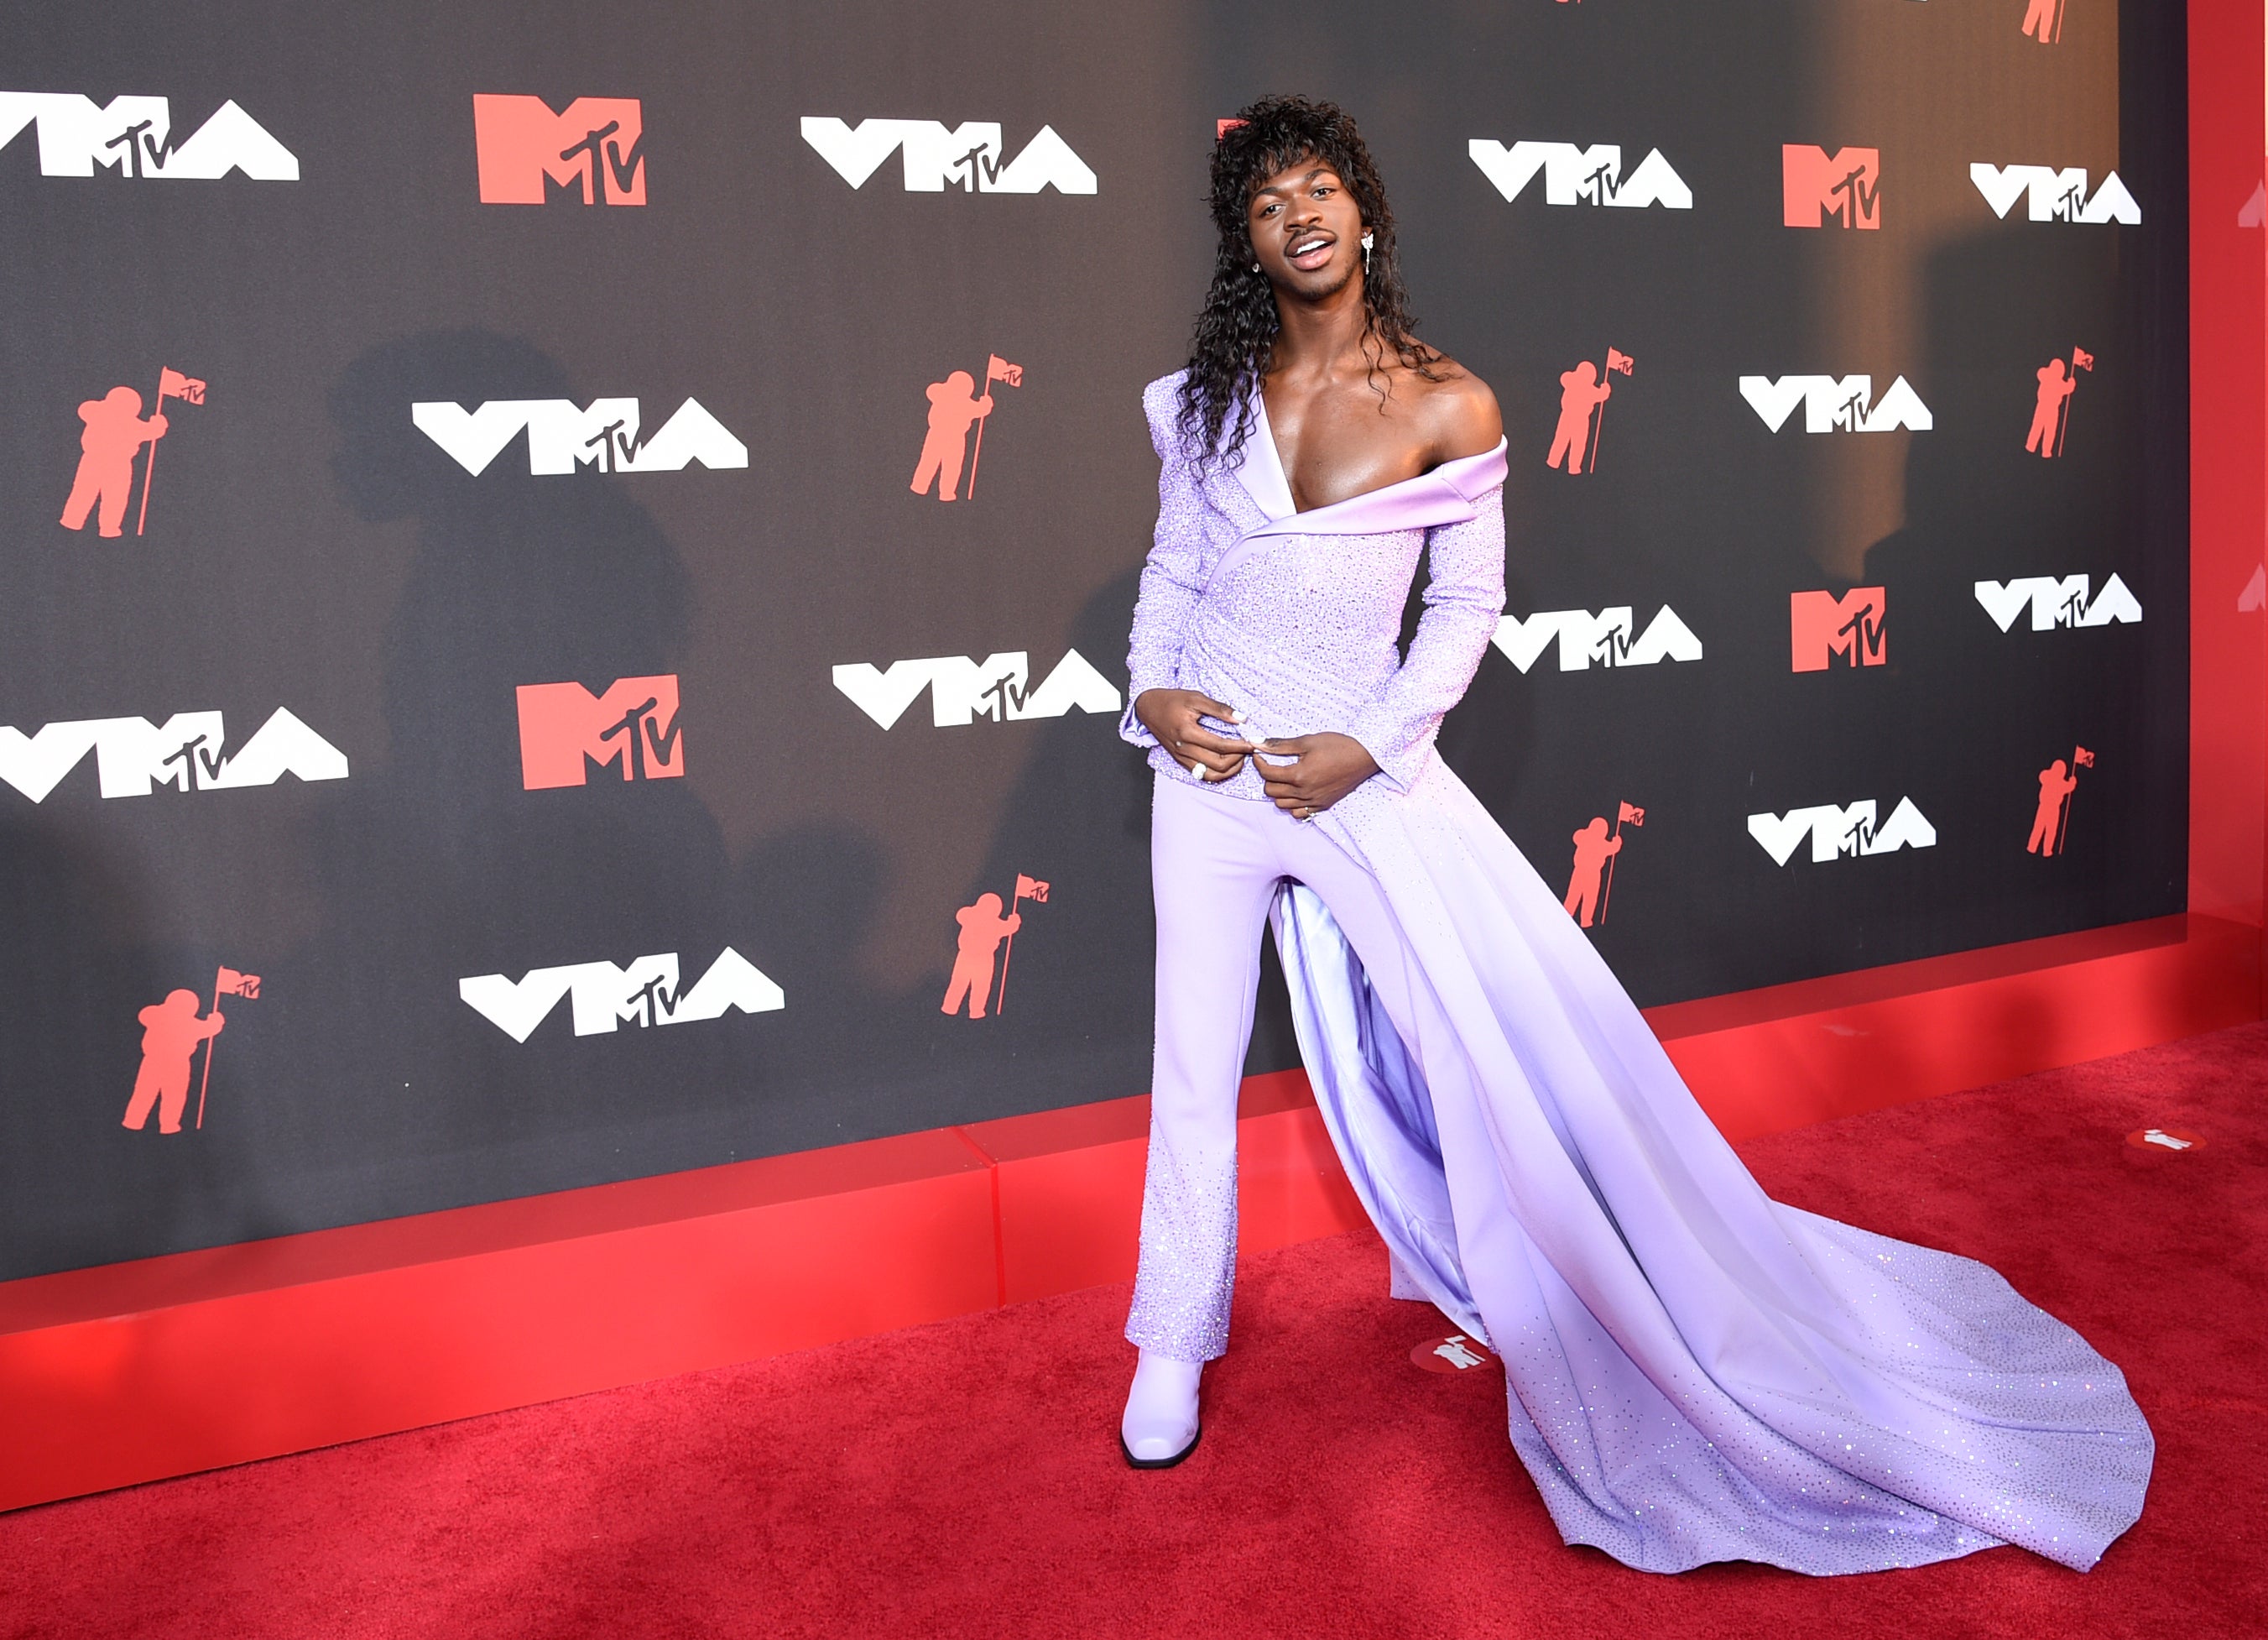 Lil Nas Xs Best Fashion Moments As His Debut Album Is Set To Drop The Independent